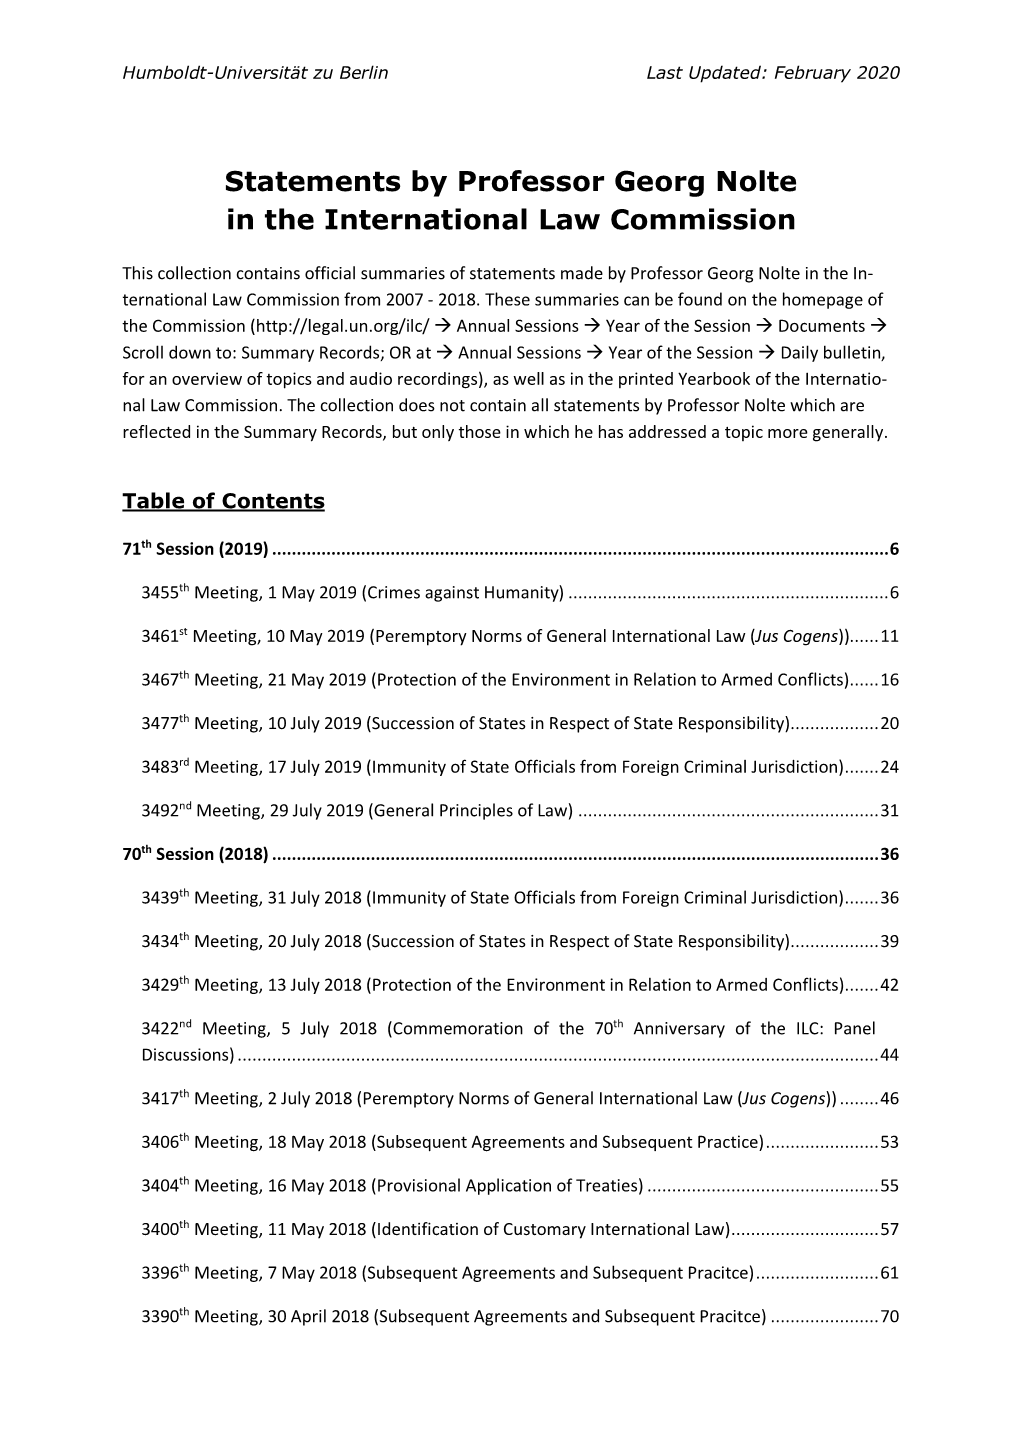 Statements by Professor Georg Nolte in the International Law Commission